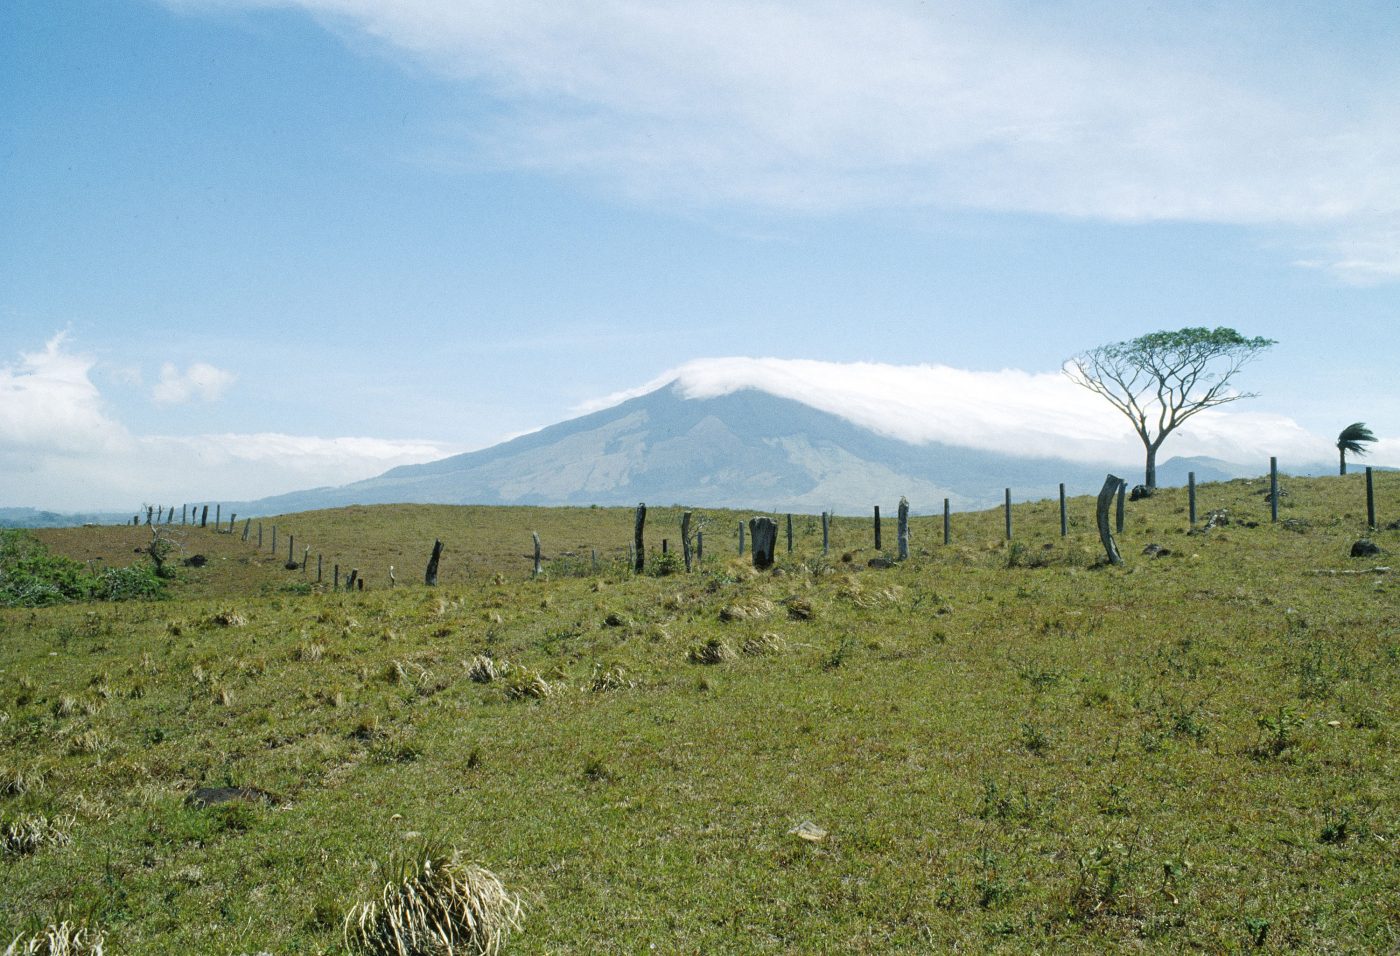 A view of the volcanic mountain Miravalles in Costa Rica. The Institute Costarricense de Electricidad is constructing a geo-thermal plant at La Fortuna, near Miravalles, to harness geothermal energy to produce electricity.